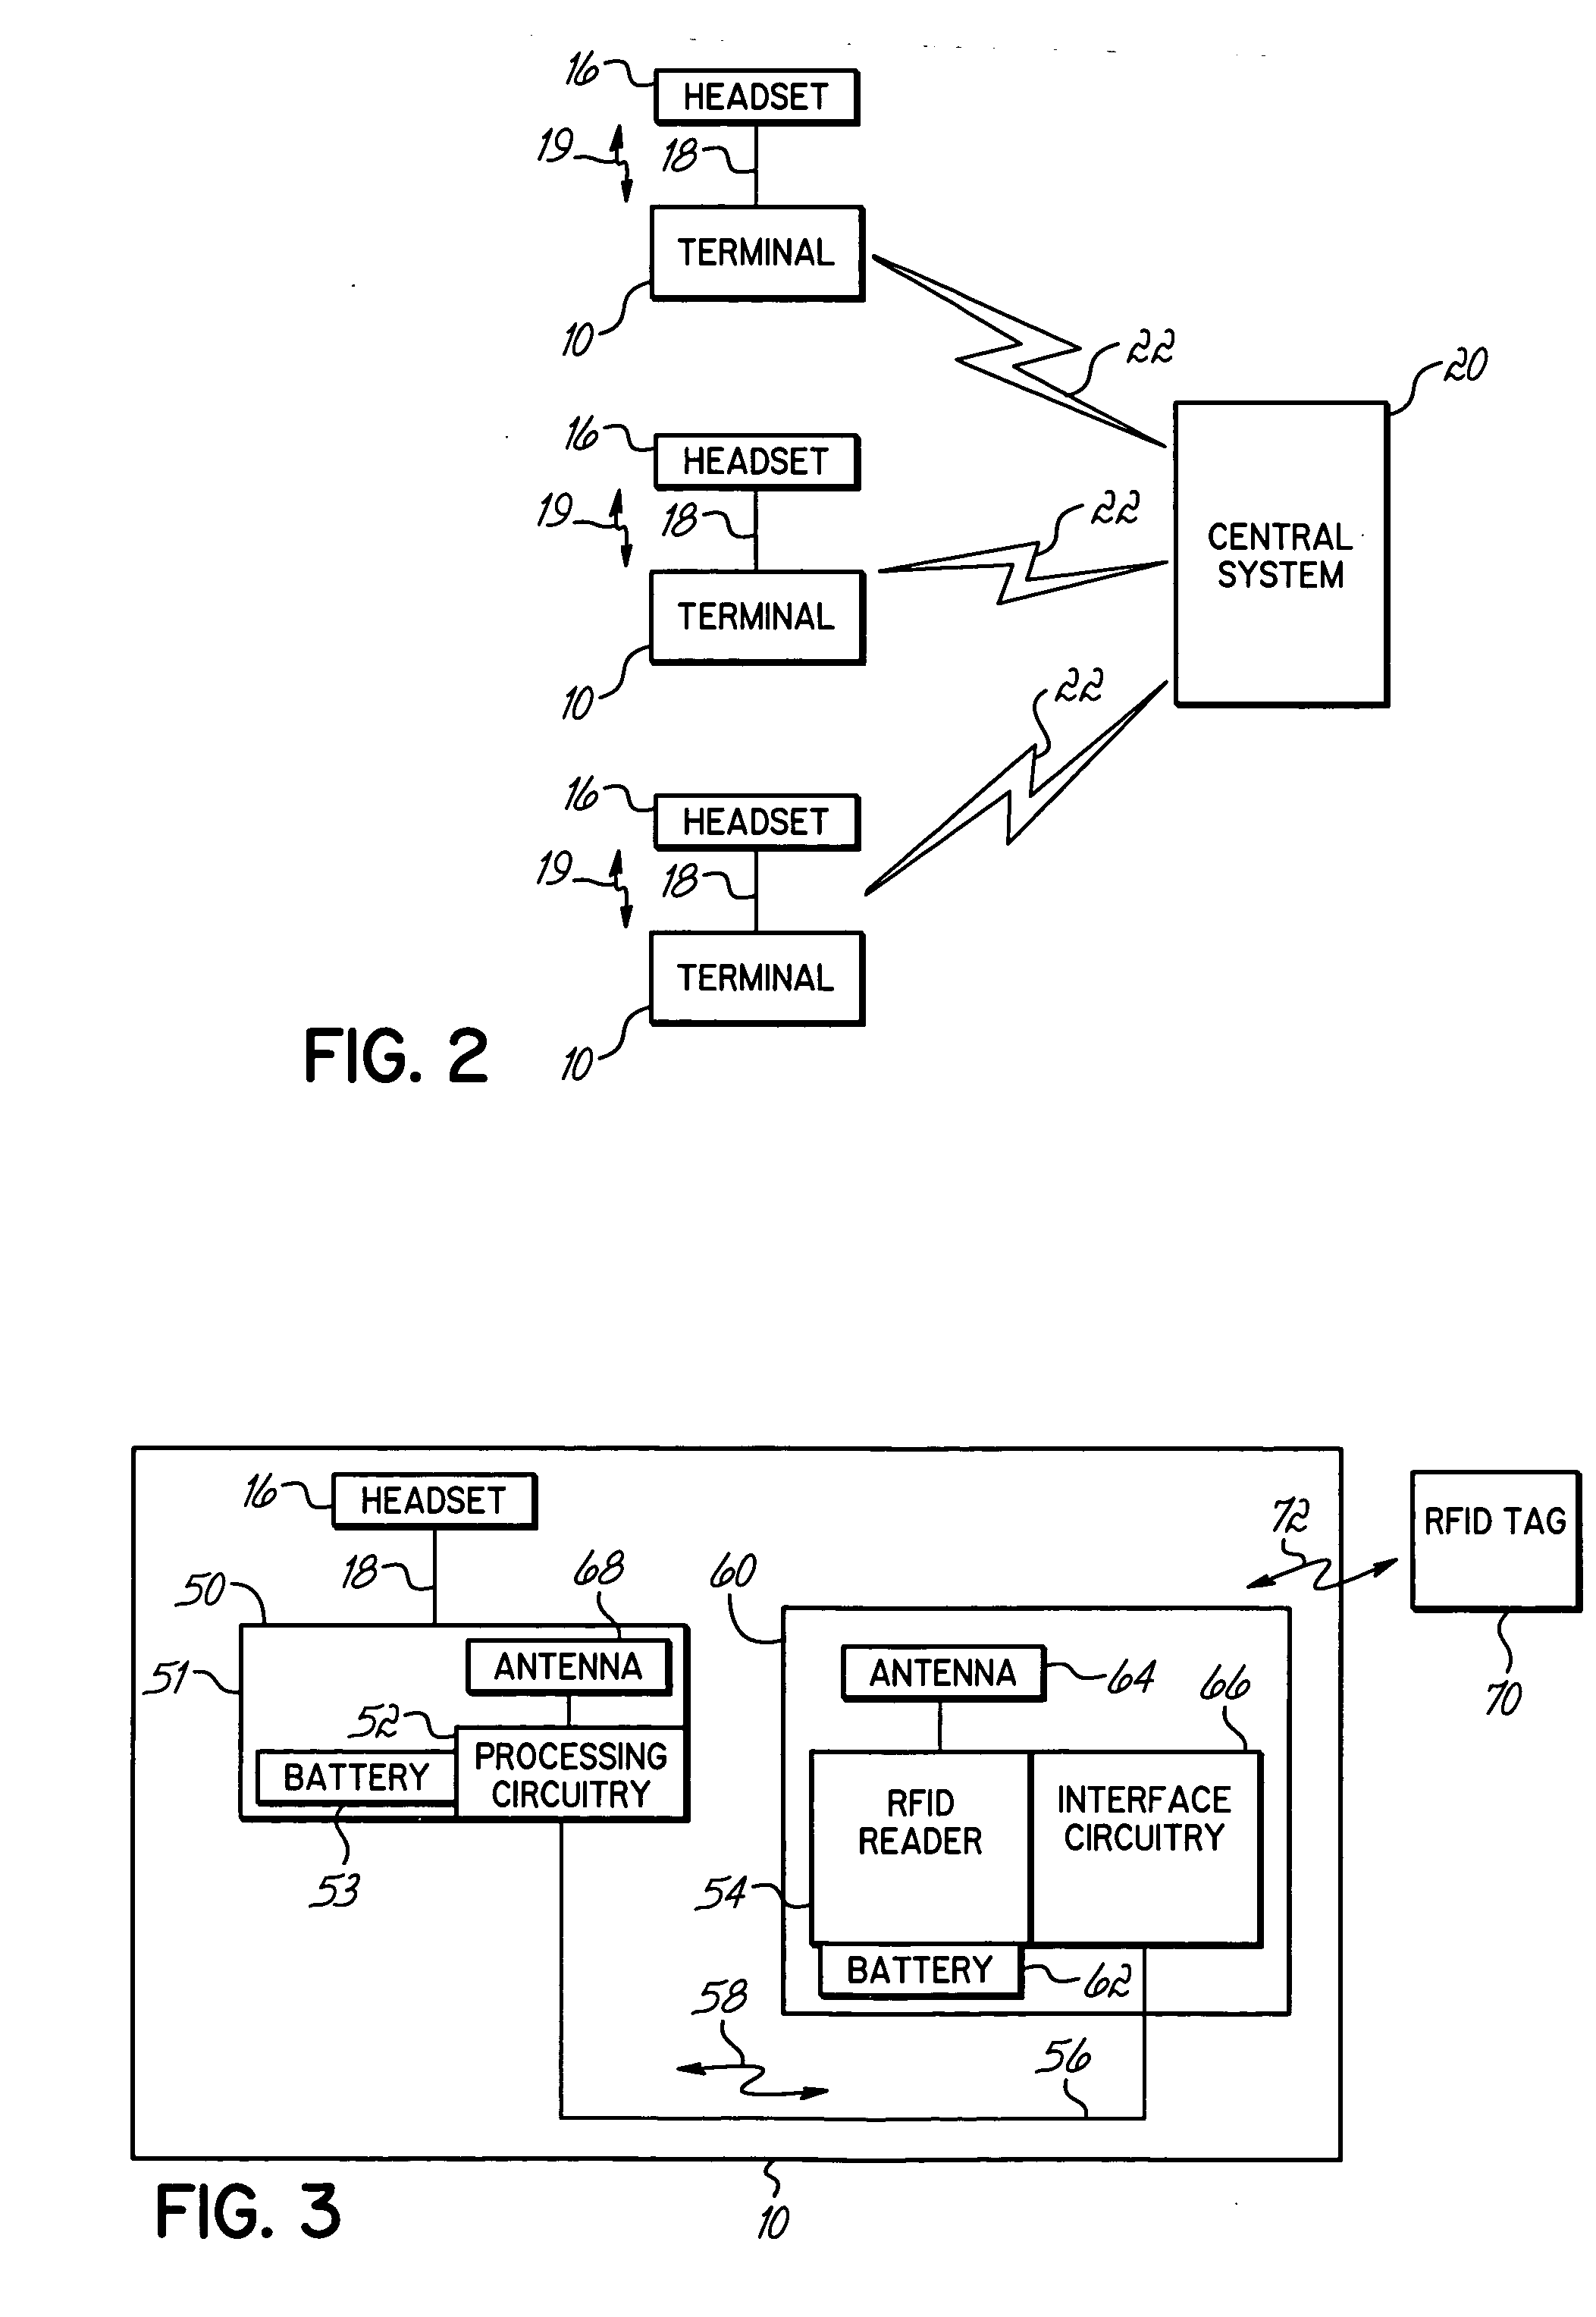 Terminal device for voice-directed work and information exchange